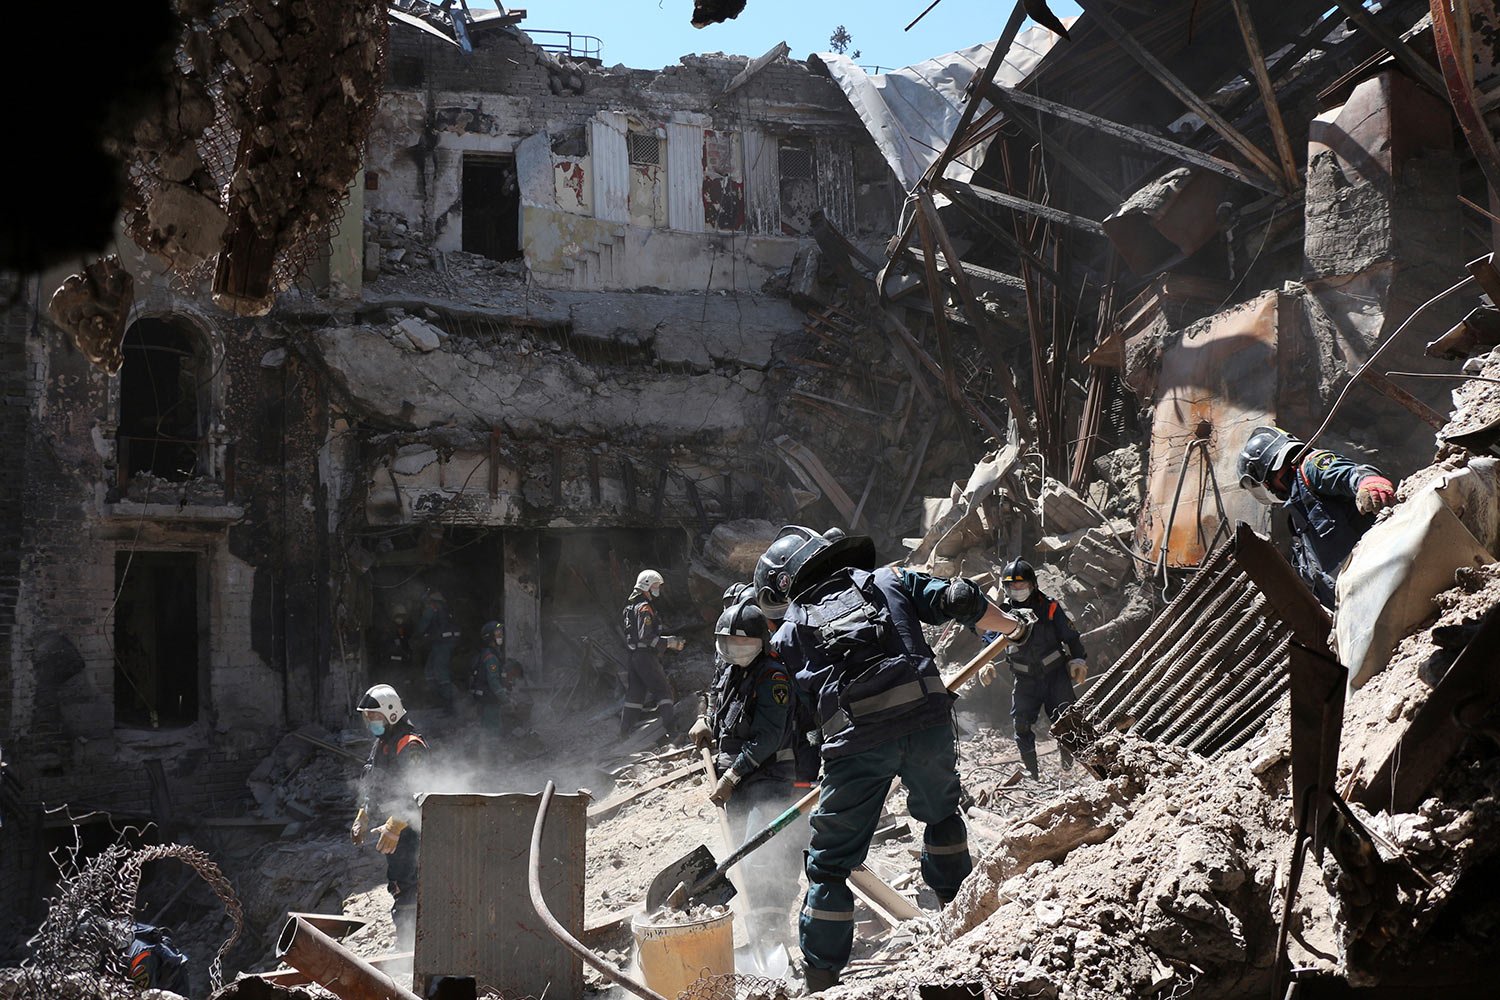  Donetsk People Republic Emergency Situations Ministry employees clear rubble at the side of the damaged Mariupol theater in Mariupol, in a territory under the government of the Donetsk People's Republic, eastern Ukraine, Thursday, May 12, 2022. (AP 